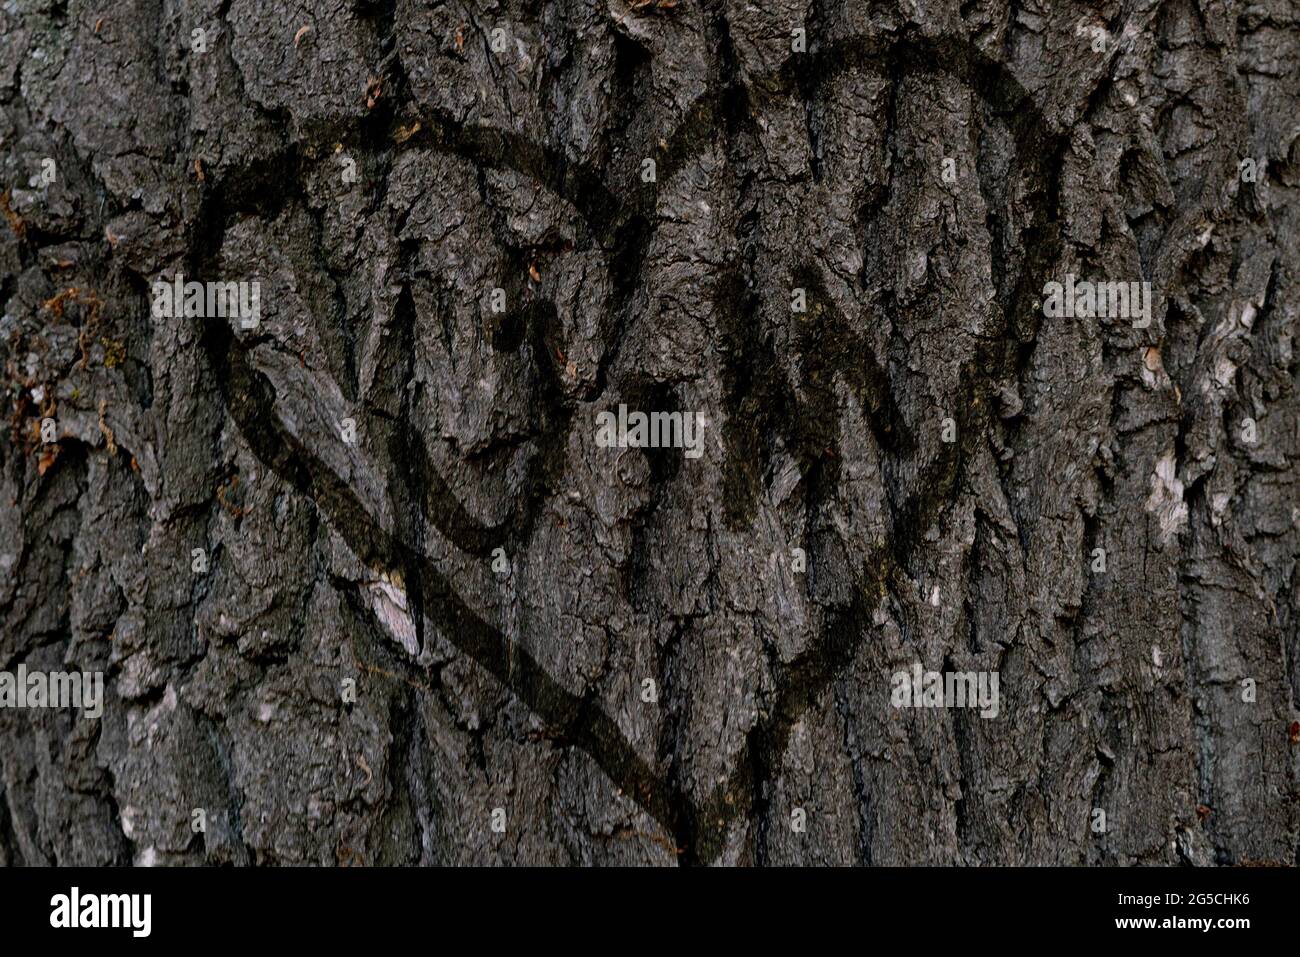 the names of peopel who love each other in the shape of heart carved on the tree Stock Photo